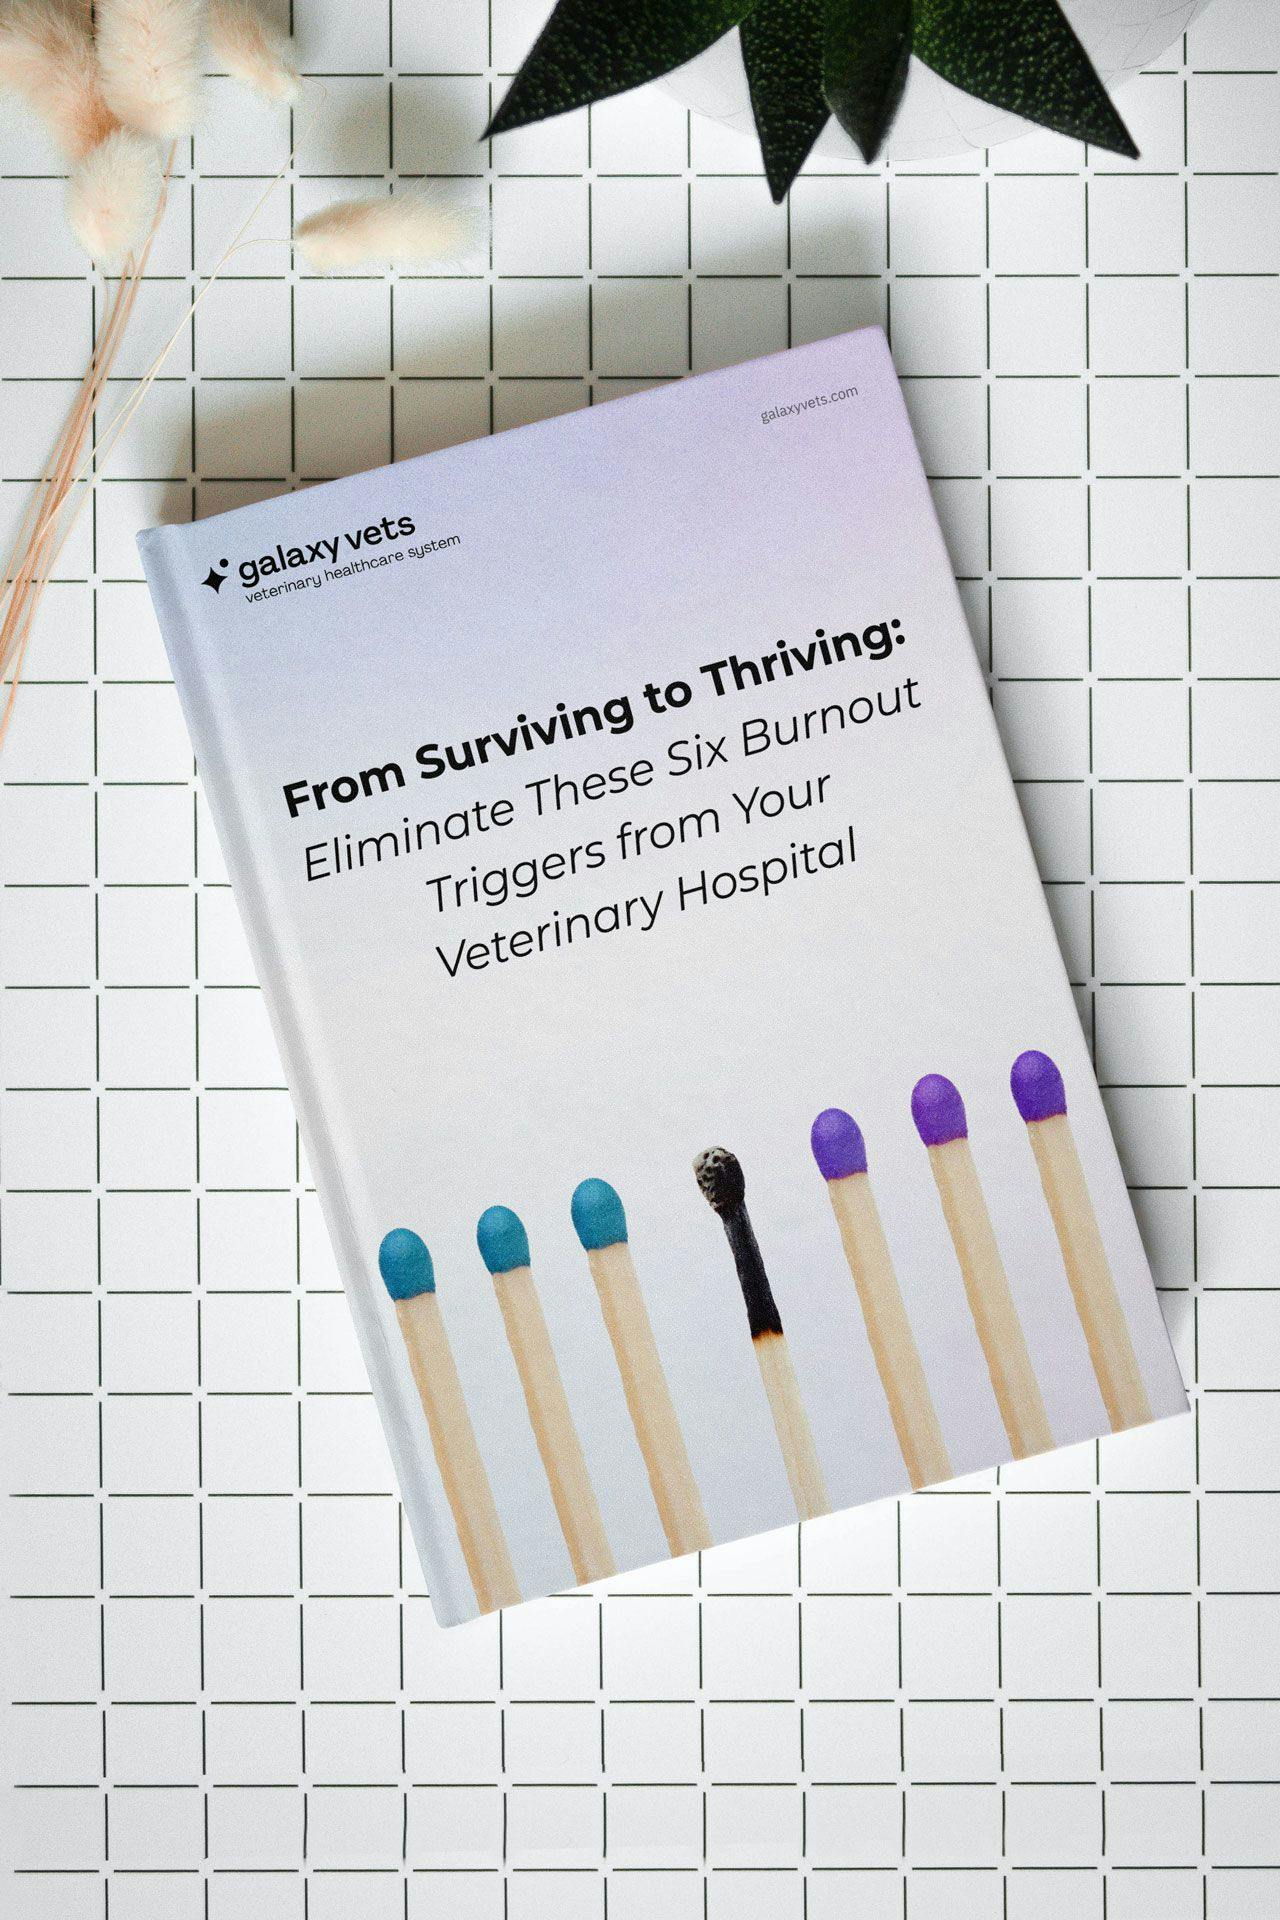 Galaxy Vets unveils research paper on burnout triggers in veterinary medicine